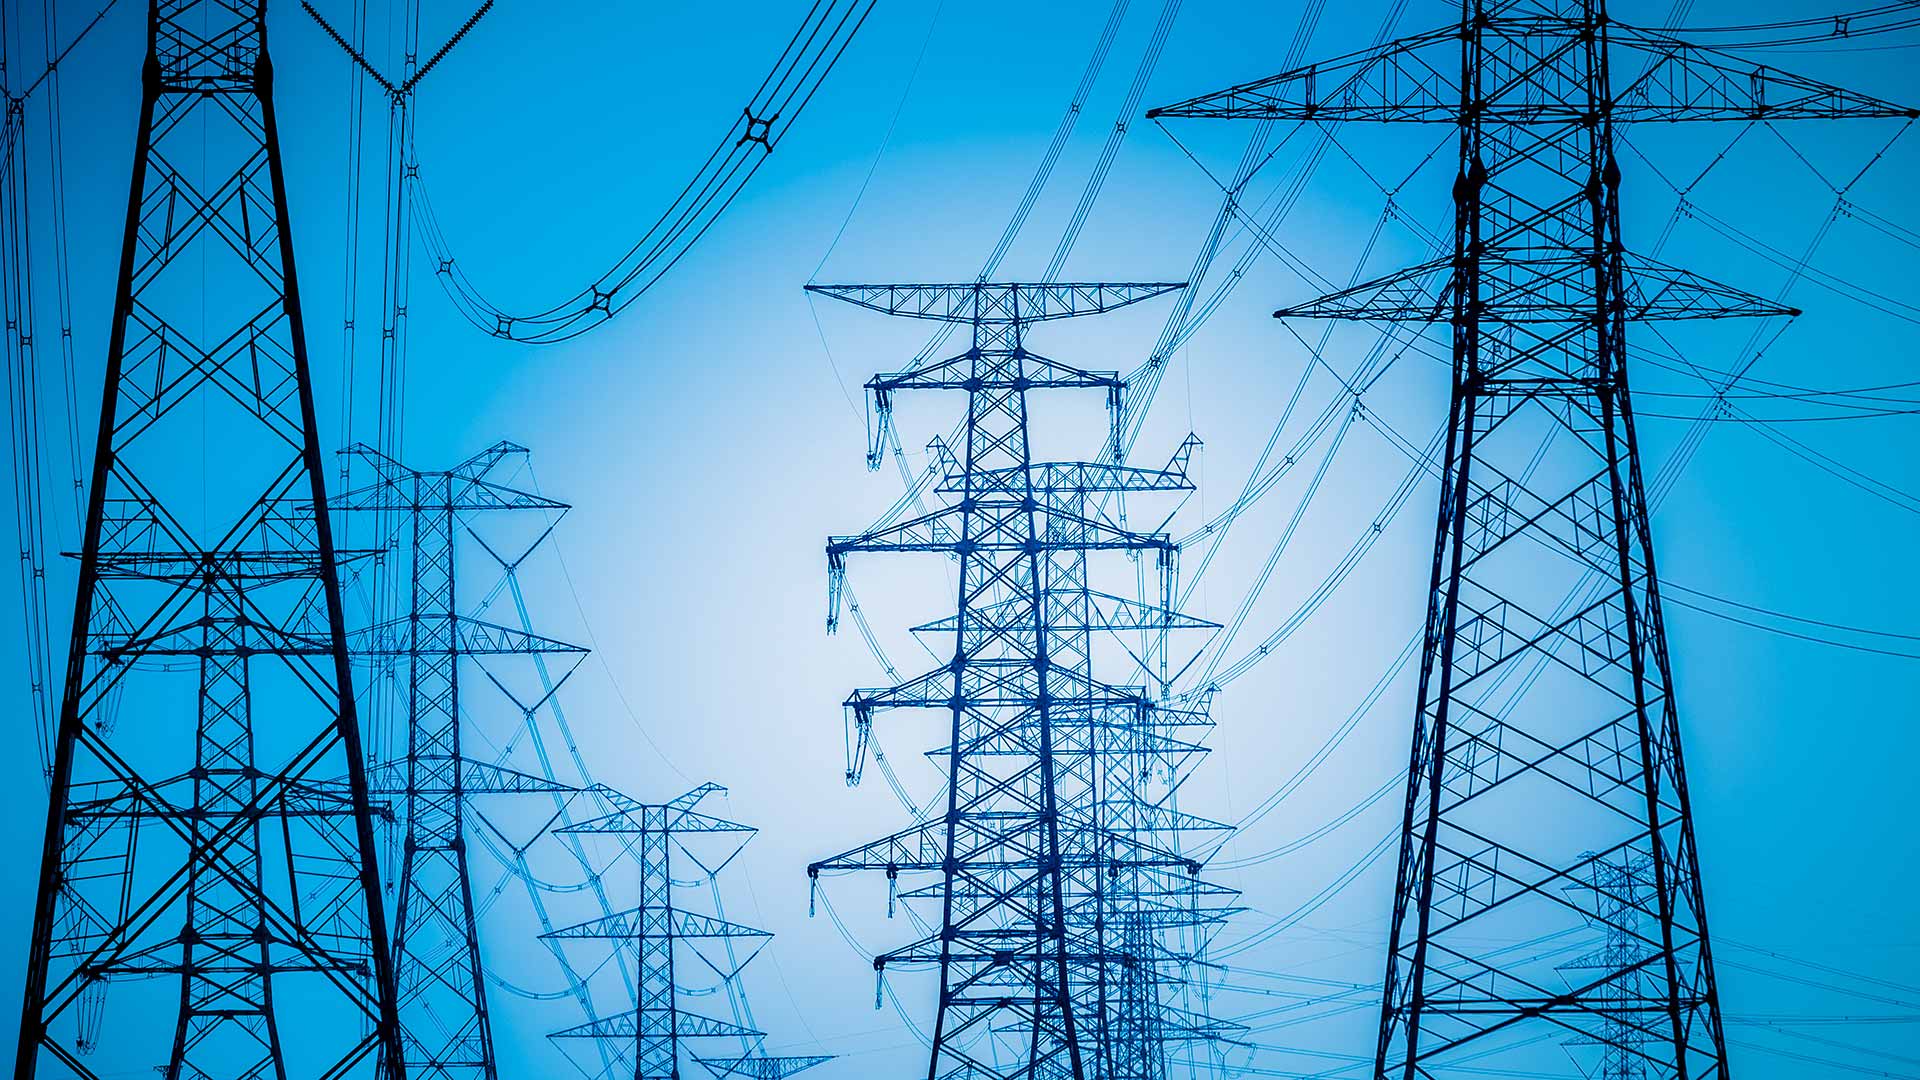 Silhouettes of power lines against blue background